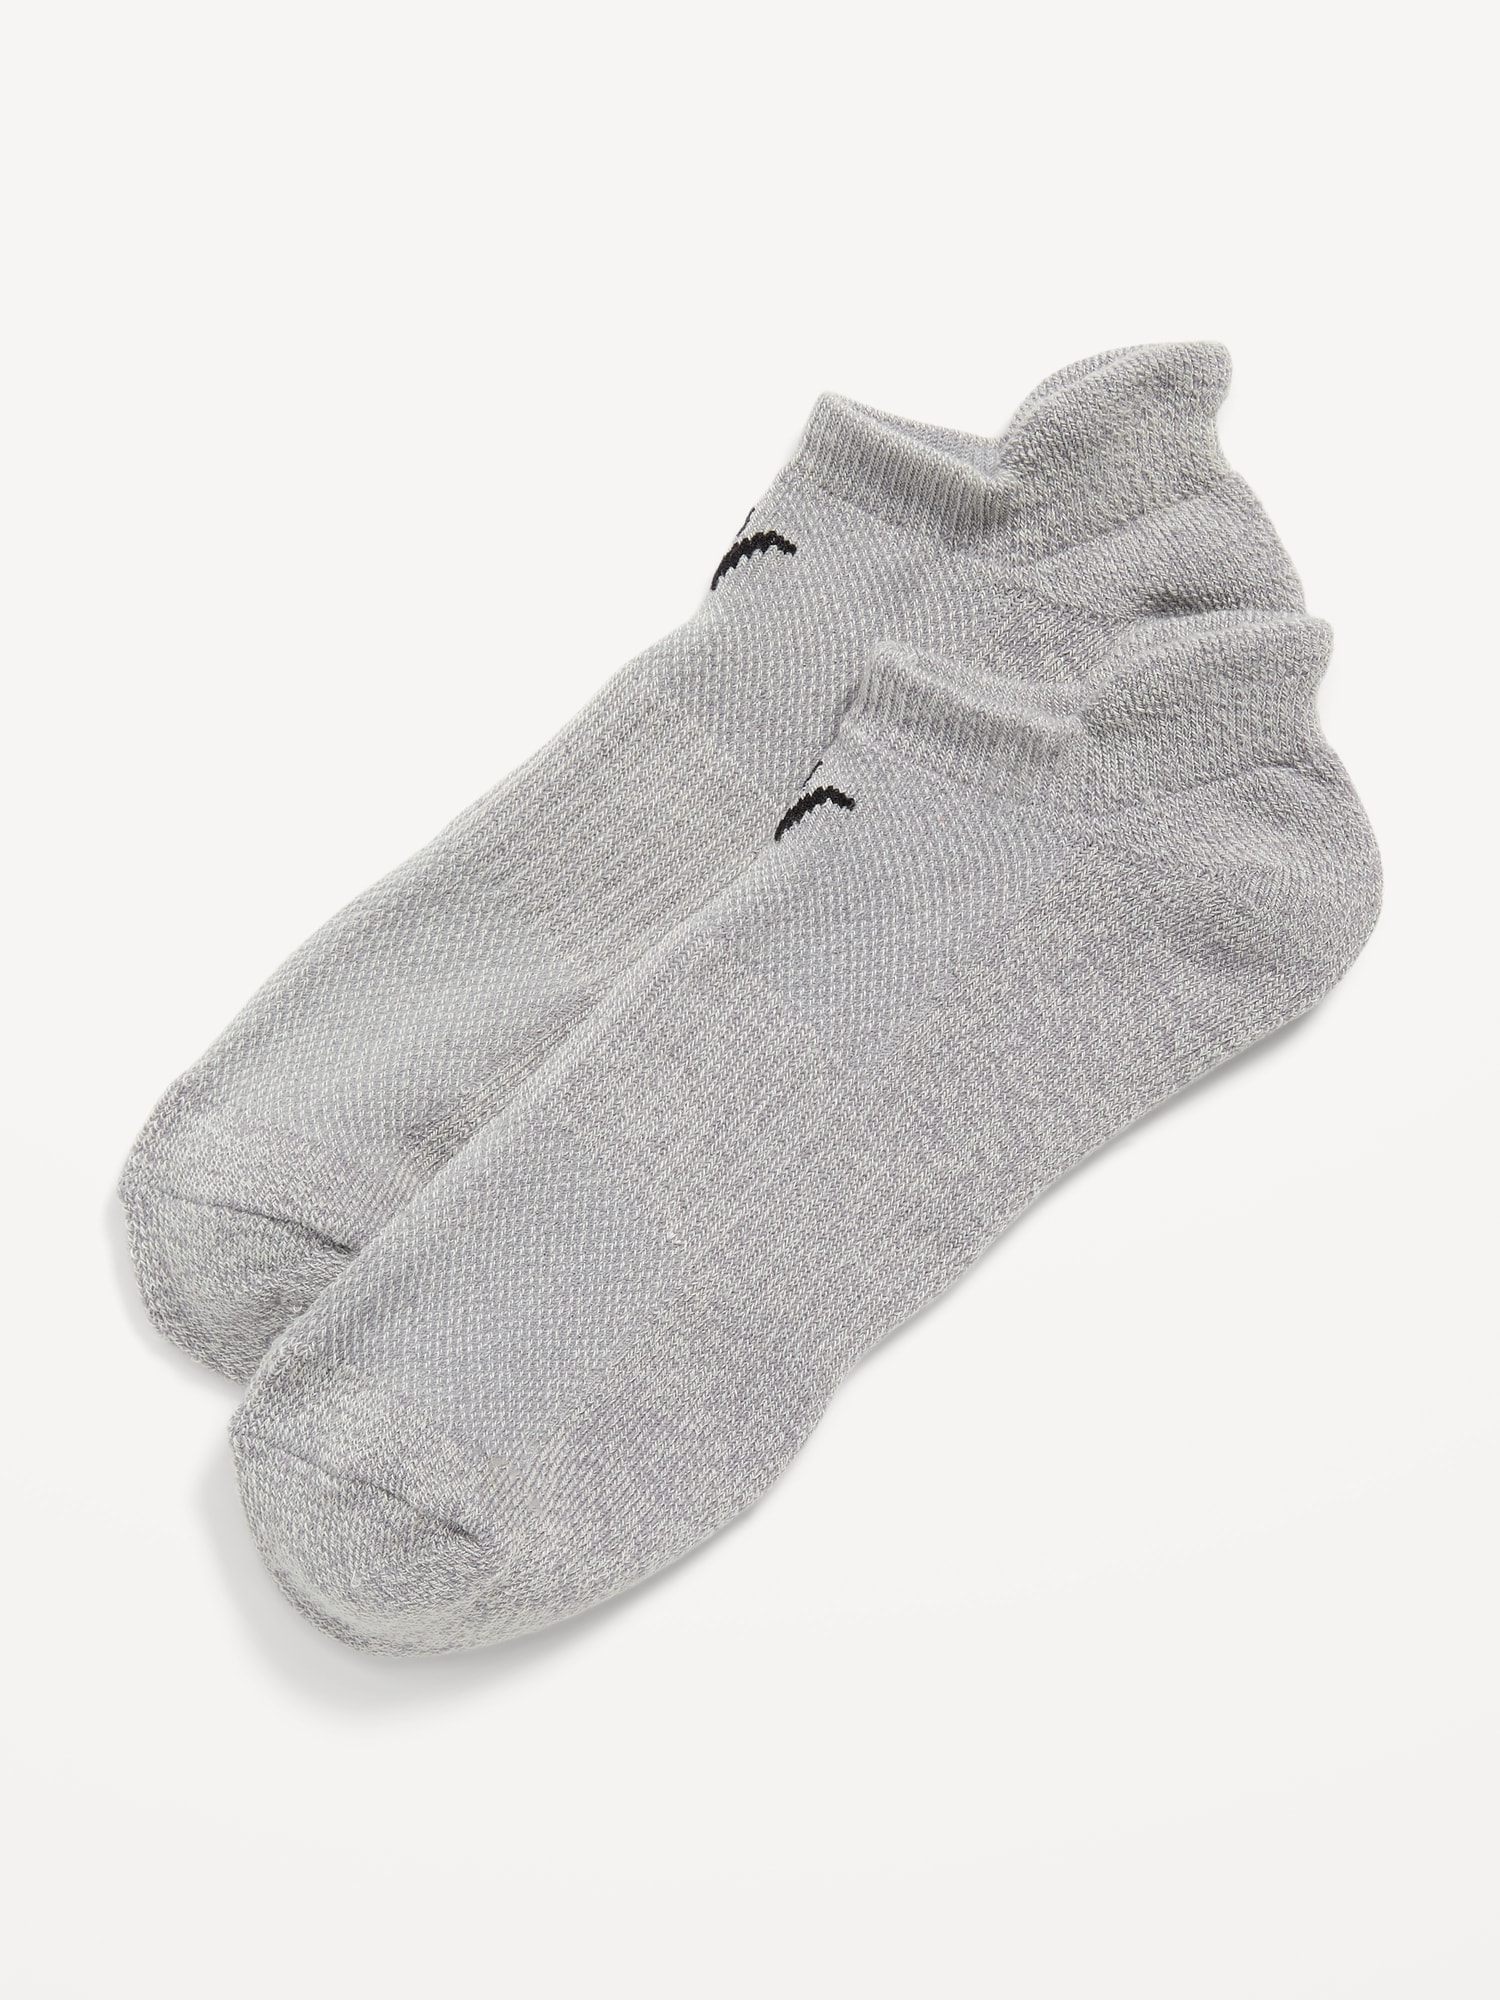 Old Navy Athletic Ankle Socks gray. 1